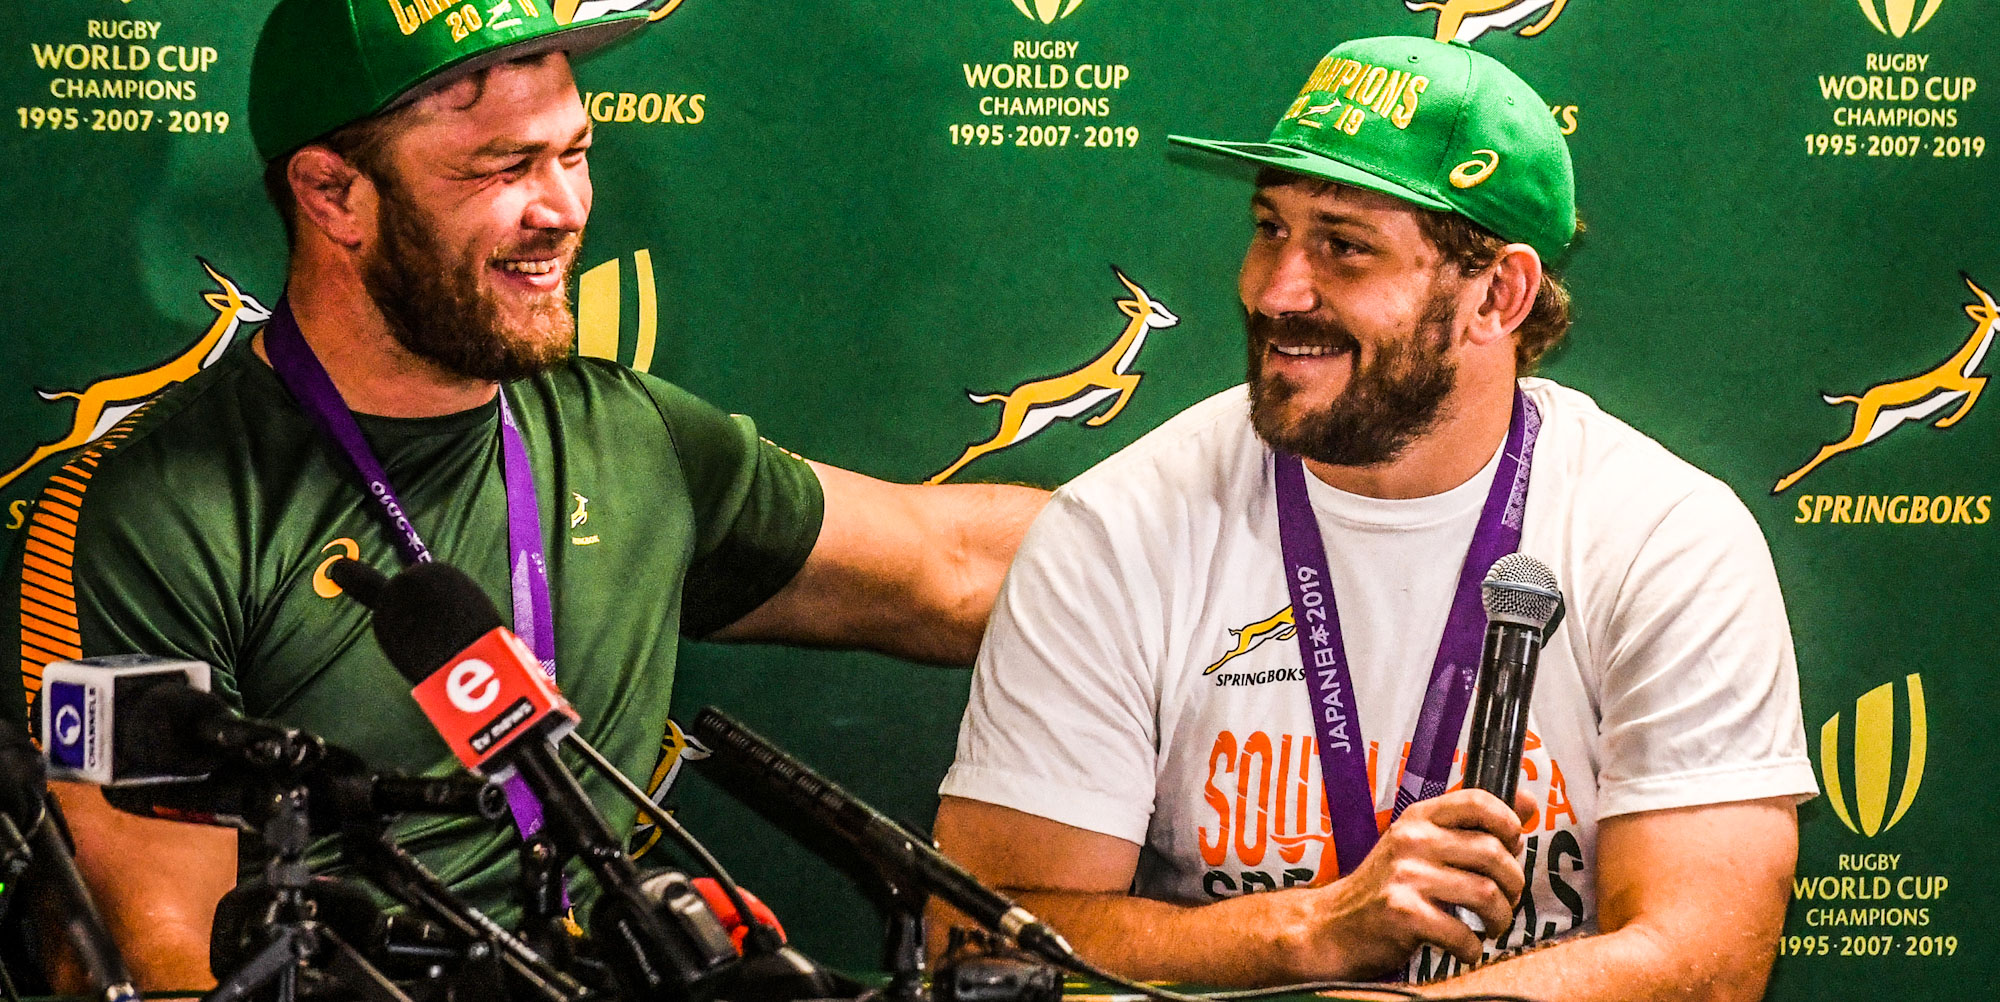 Sharing a joke with Duane Vermeulen after the Boks returned to SA from the RWC in Japan in 2019.